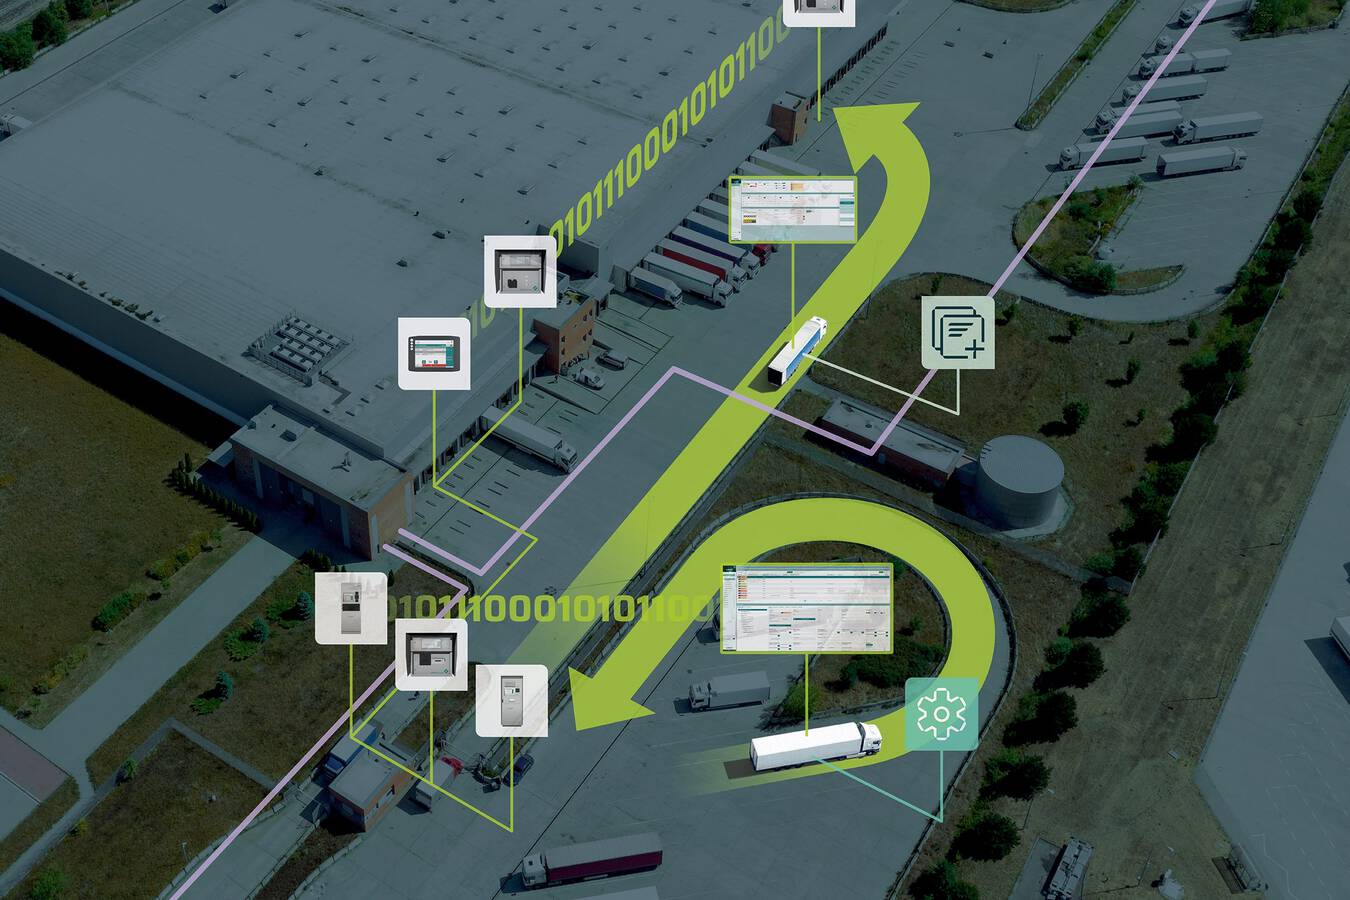 The LOGiQ yard management system is a cloud-based software solution that combines smooth and efficient truck loading operations with fully automated weighing of bulk materials.